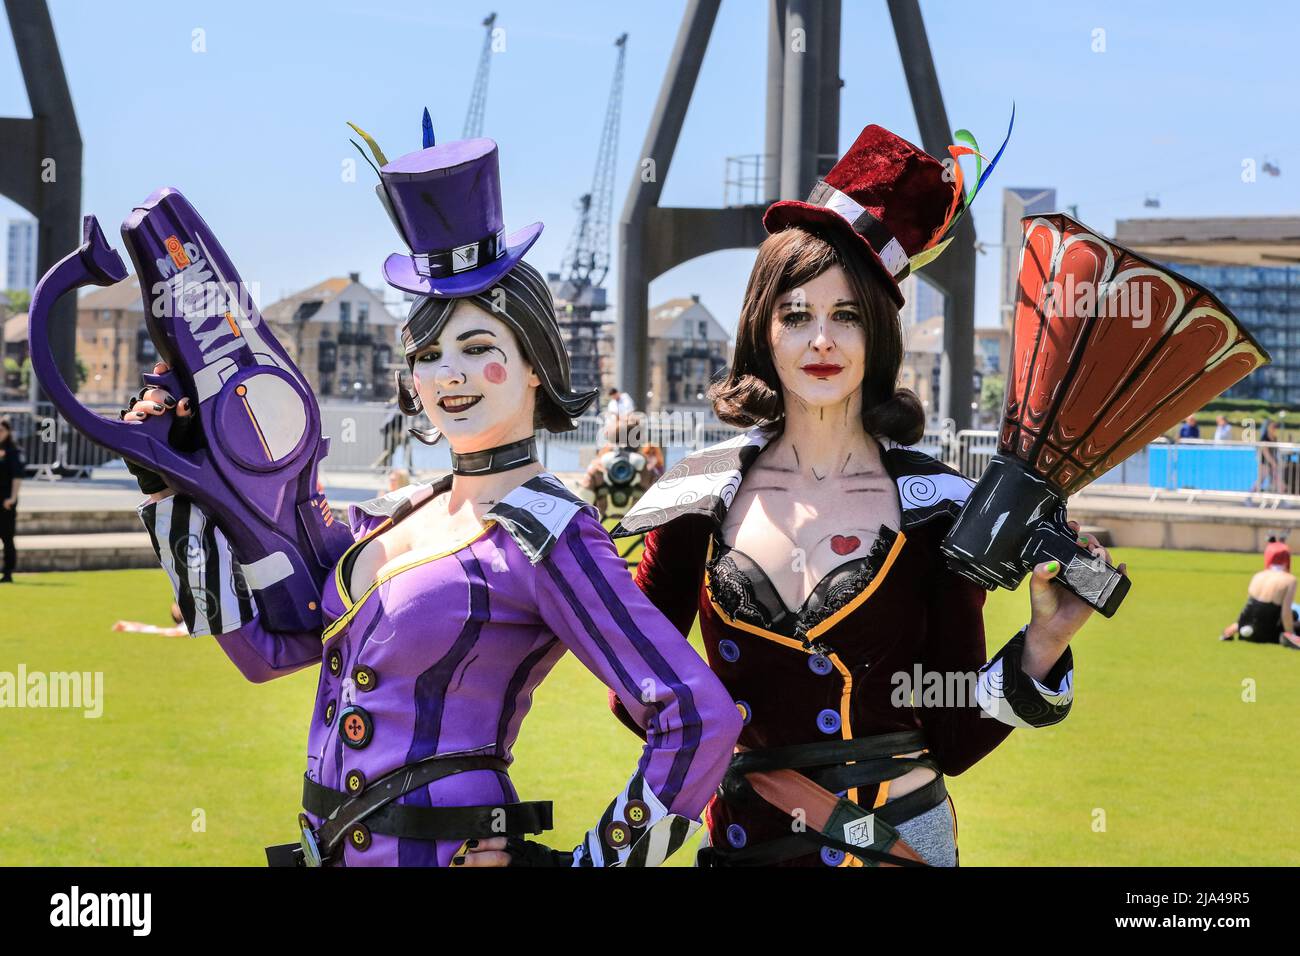 London, UK. 27th May, 2022. Mad Moxxi, two female cosplayers posing as the character from Borderlands, in red and purple outfits. Fans of anime, comics, video games, animation and all things cosplay once again gather at MCM Comic Con in and around the ExCel exhibition centre in London for a weekend of fun, stage appearances, merchandise and cosplay. Credit: Imageplotter/Alamy Live News Stock Photo